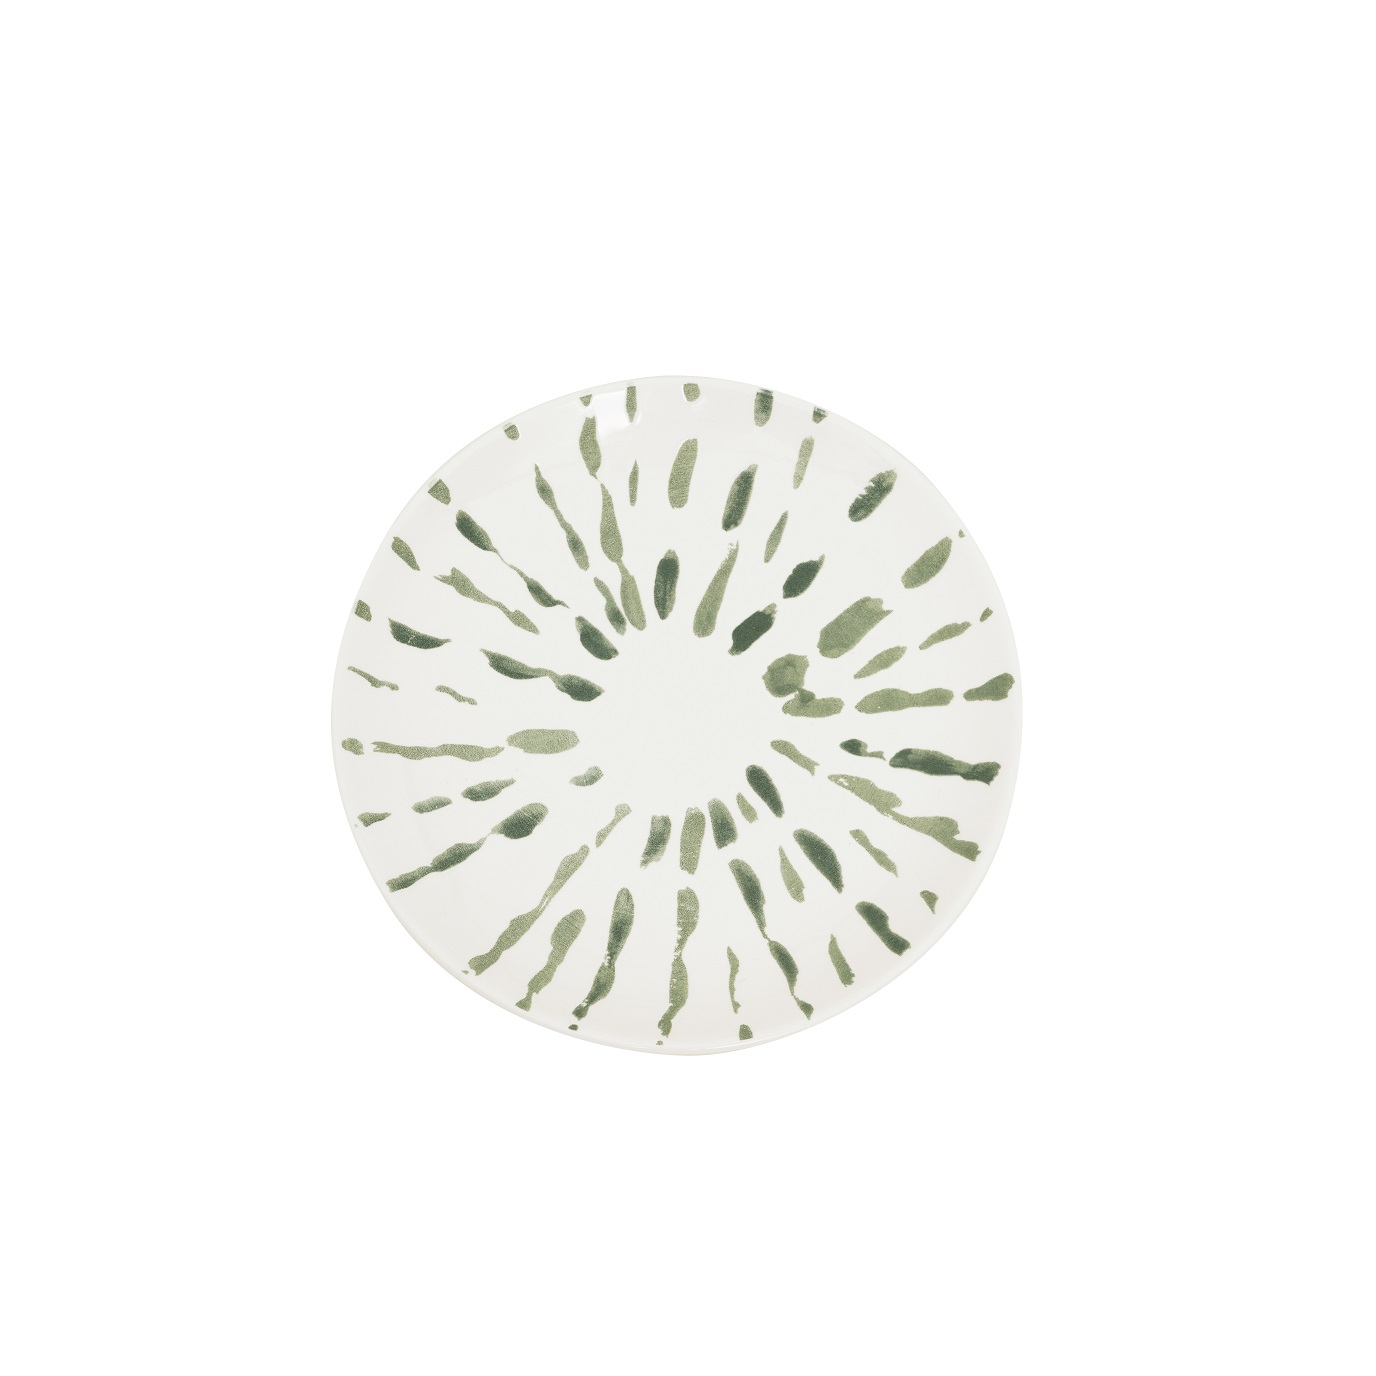 Unc Cake Plate Arts & Craft Sparks 18 Cm Gift